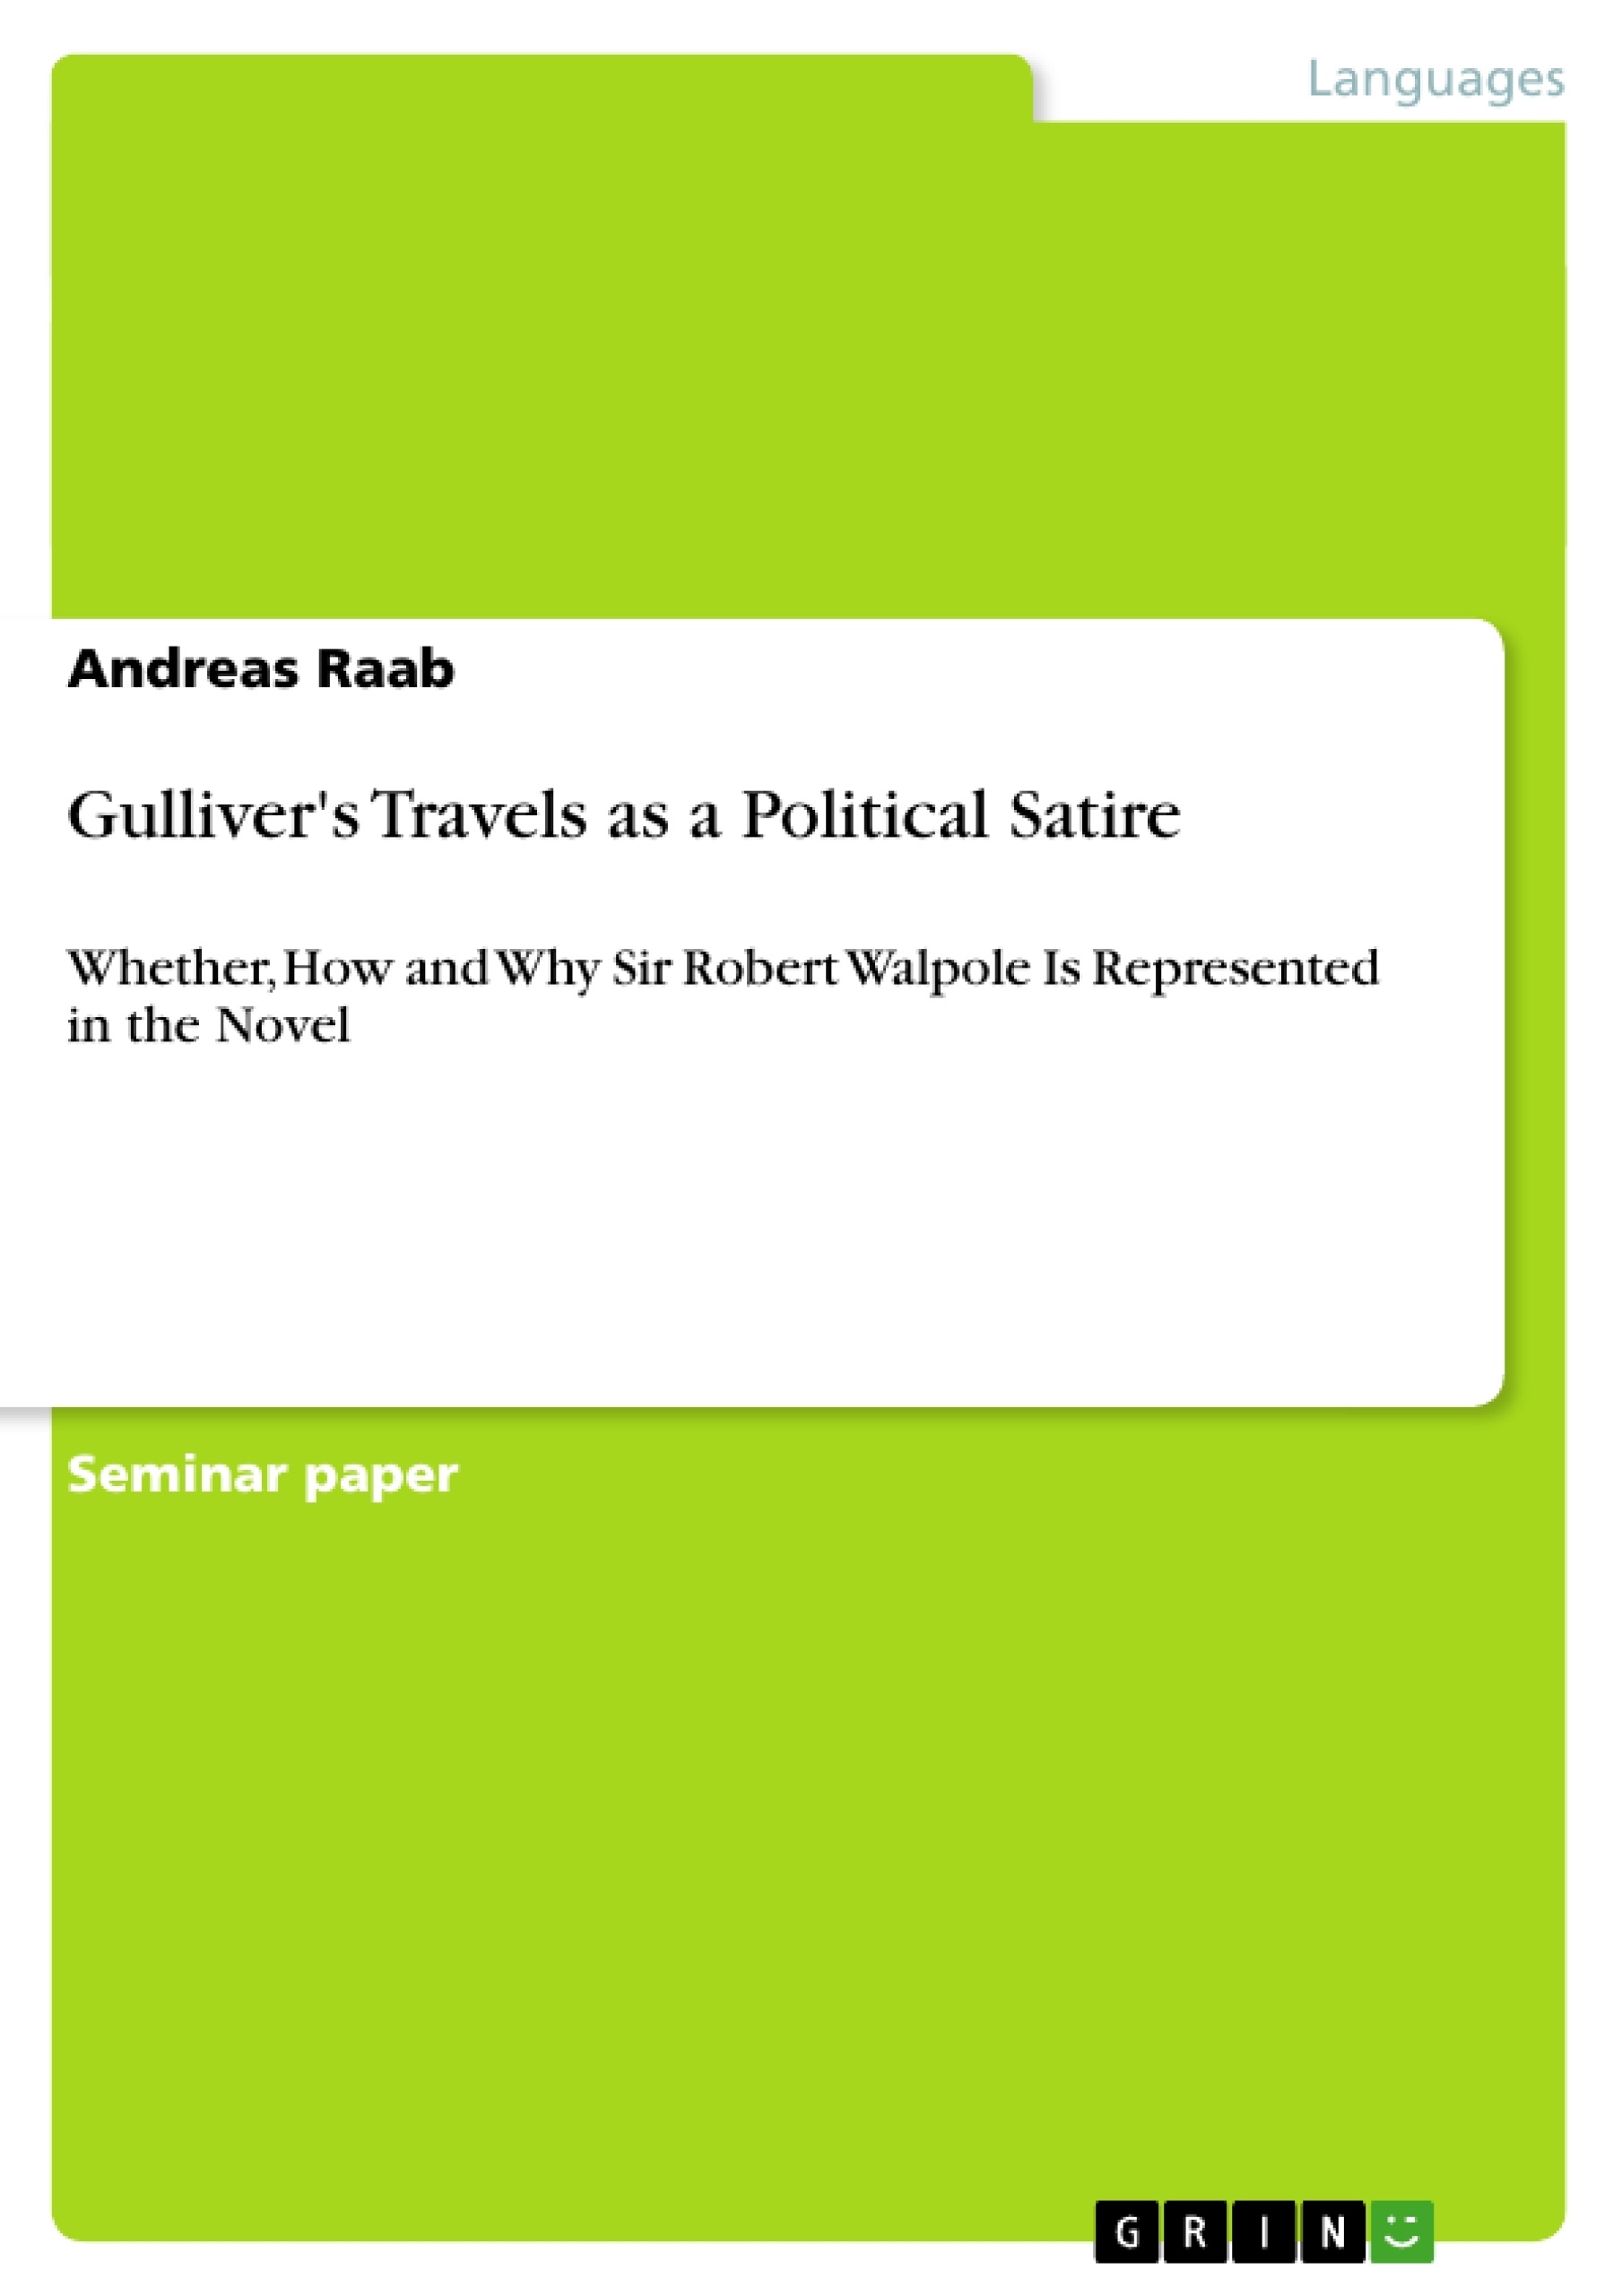 Título: Gulliver's Travels as a Political Satire